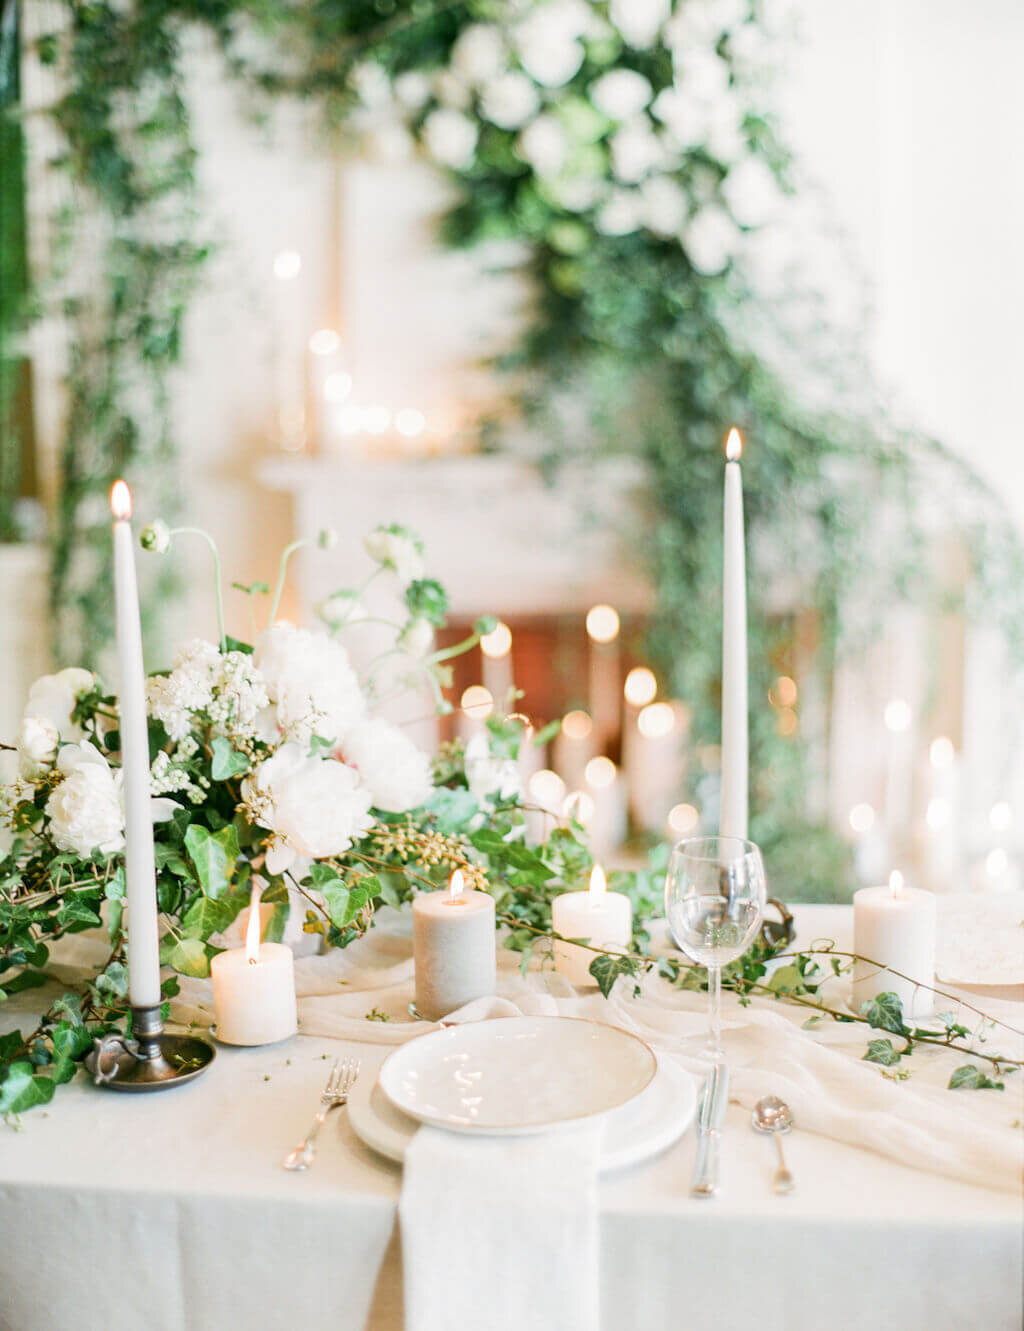 White and beige tablesettings with greenery and candles at fireplace with tall taper candles